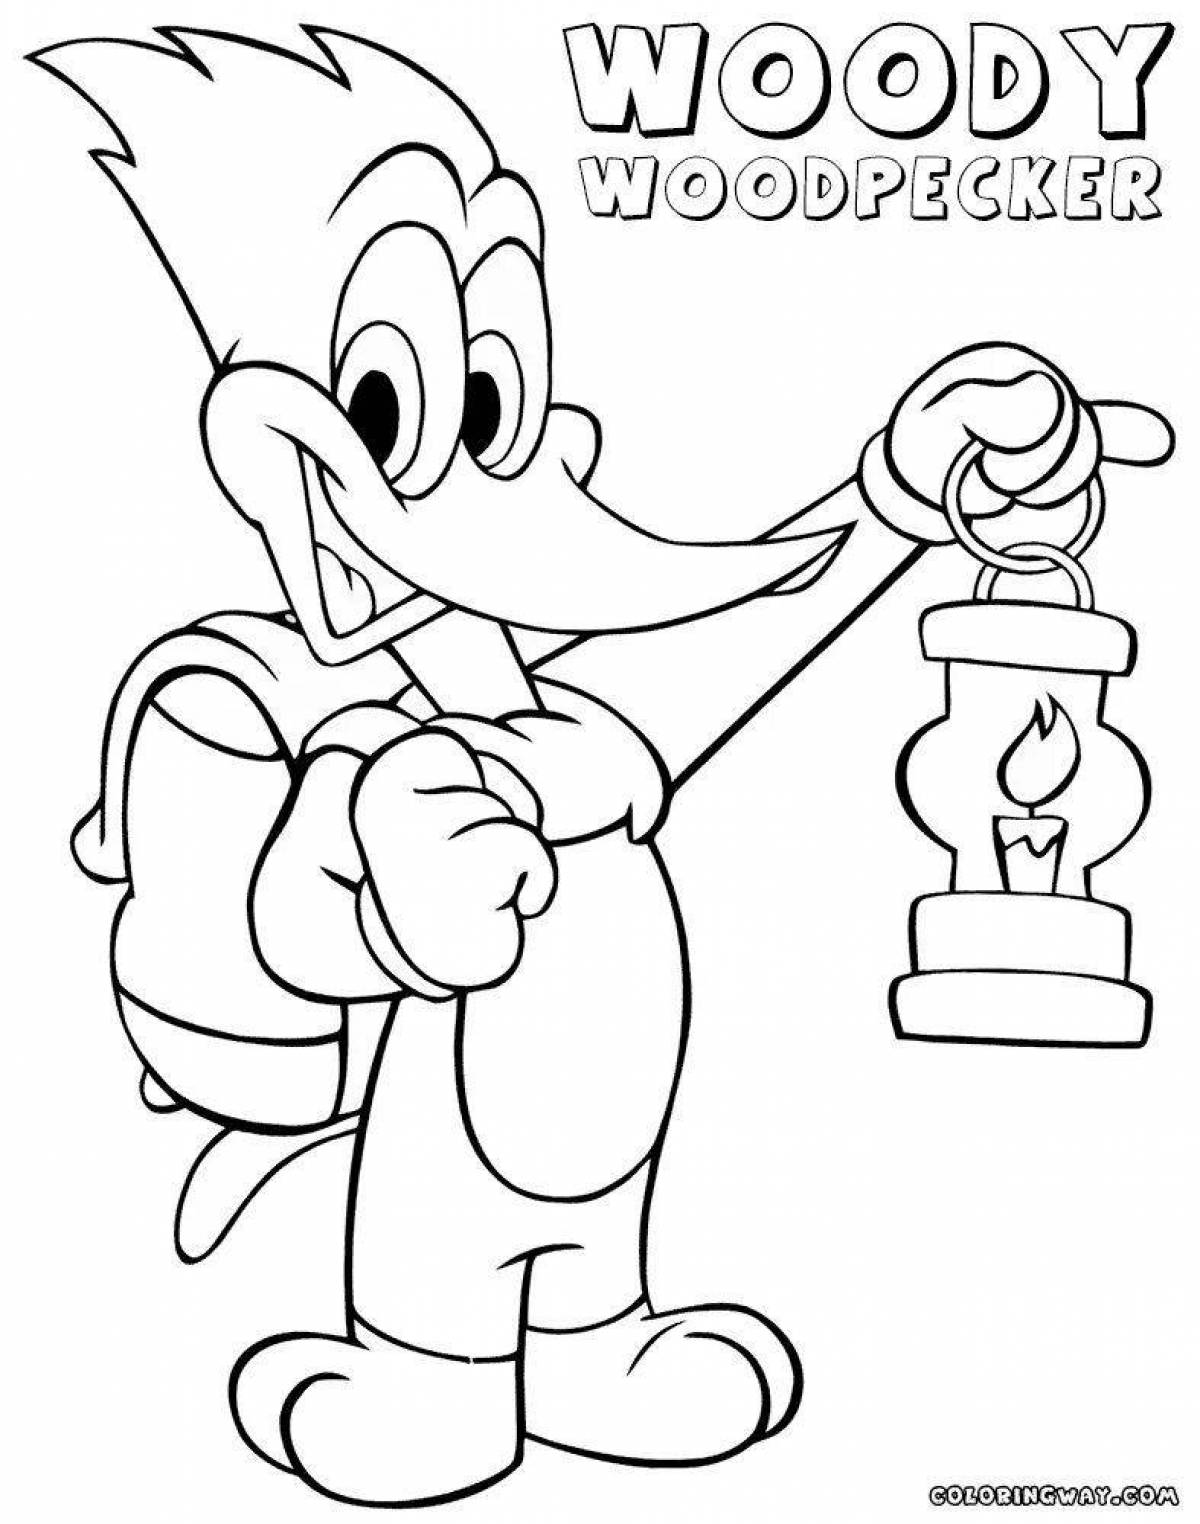 Woody woodpecker's exciting coloring book